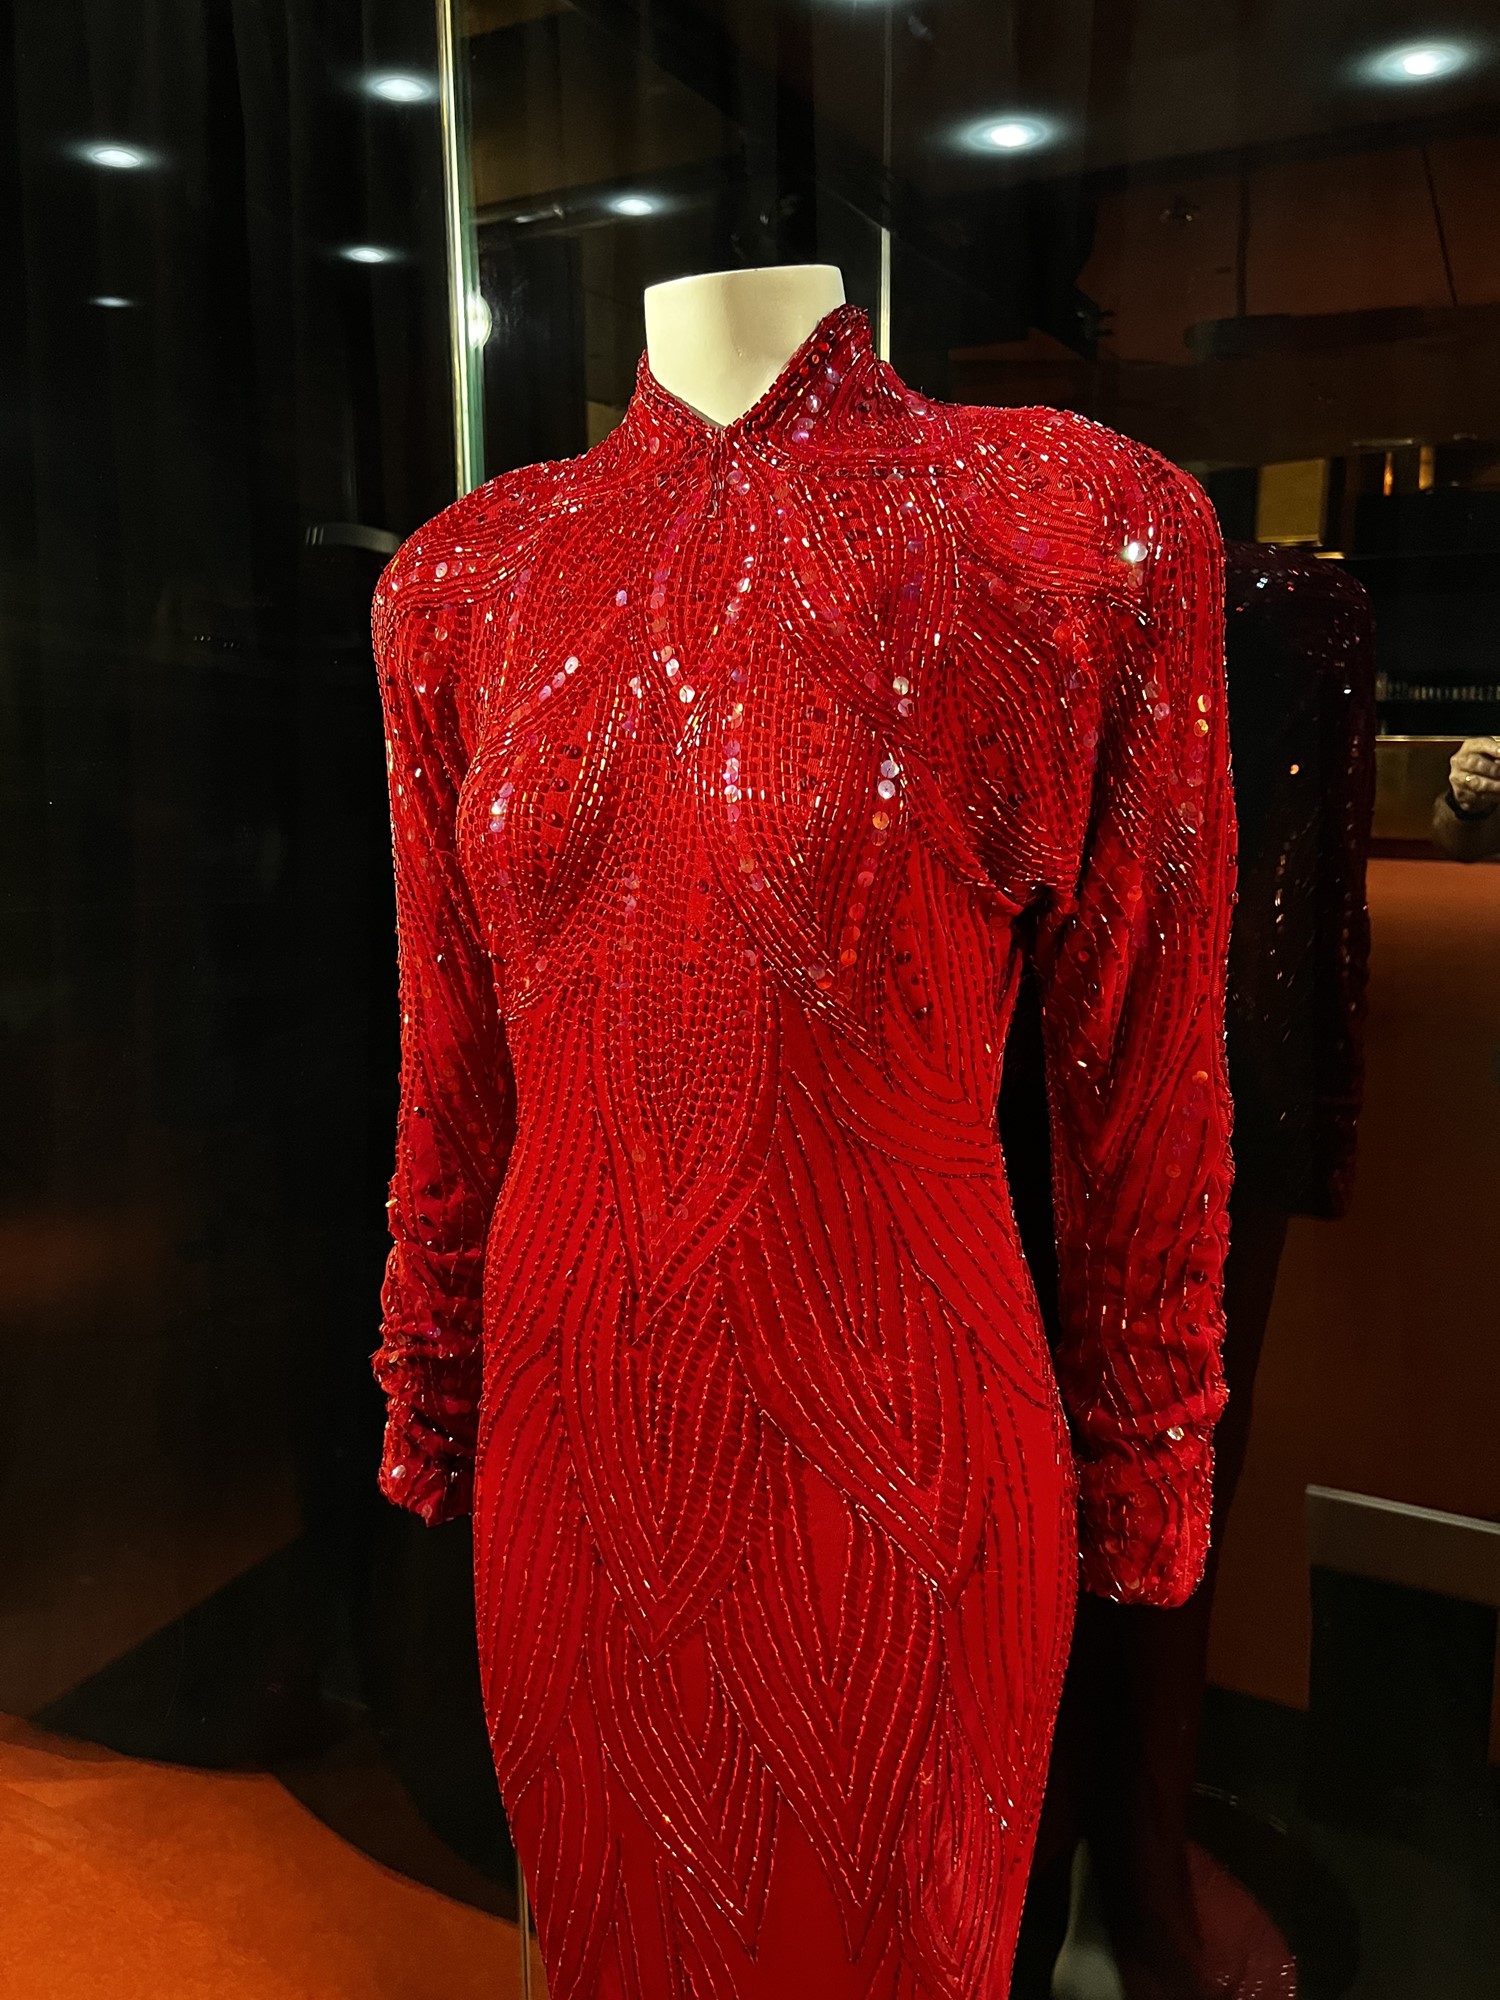 A glittering red dress on a mannequin behind glass.